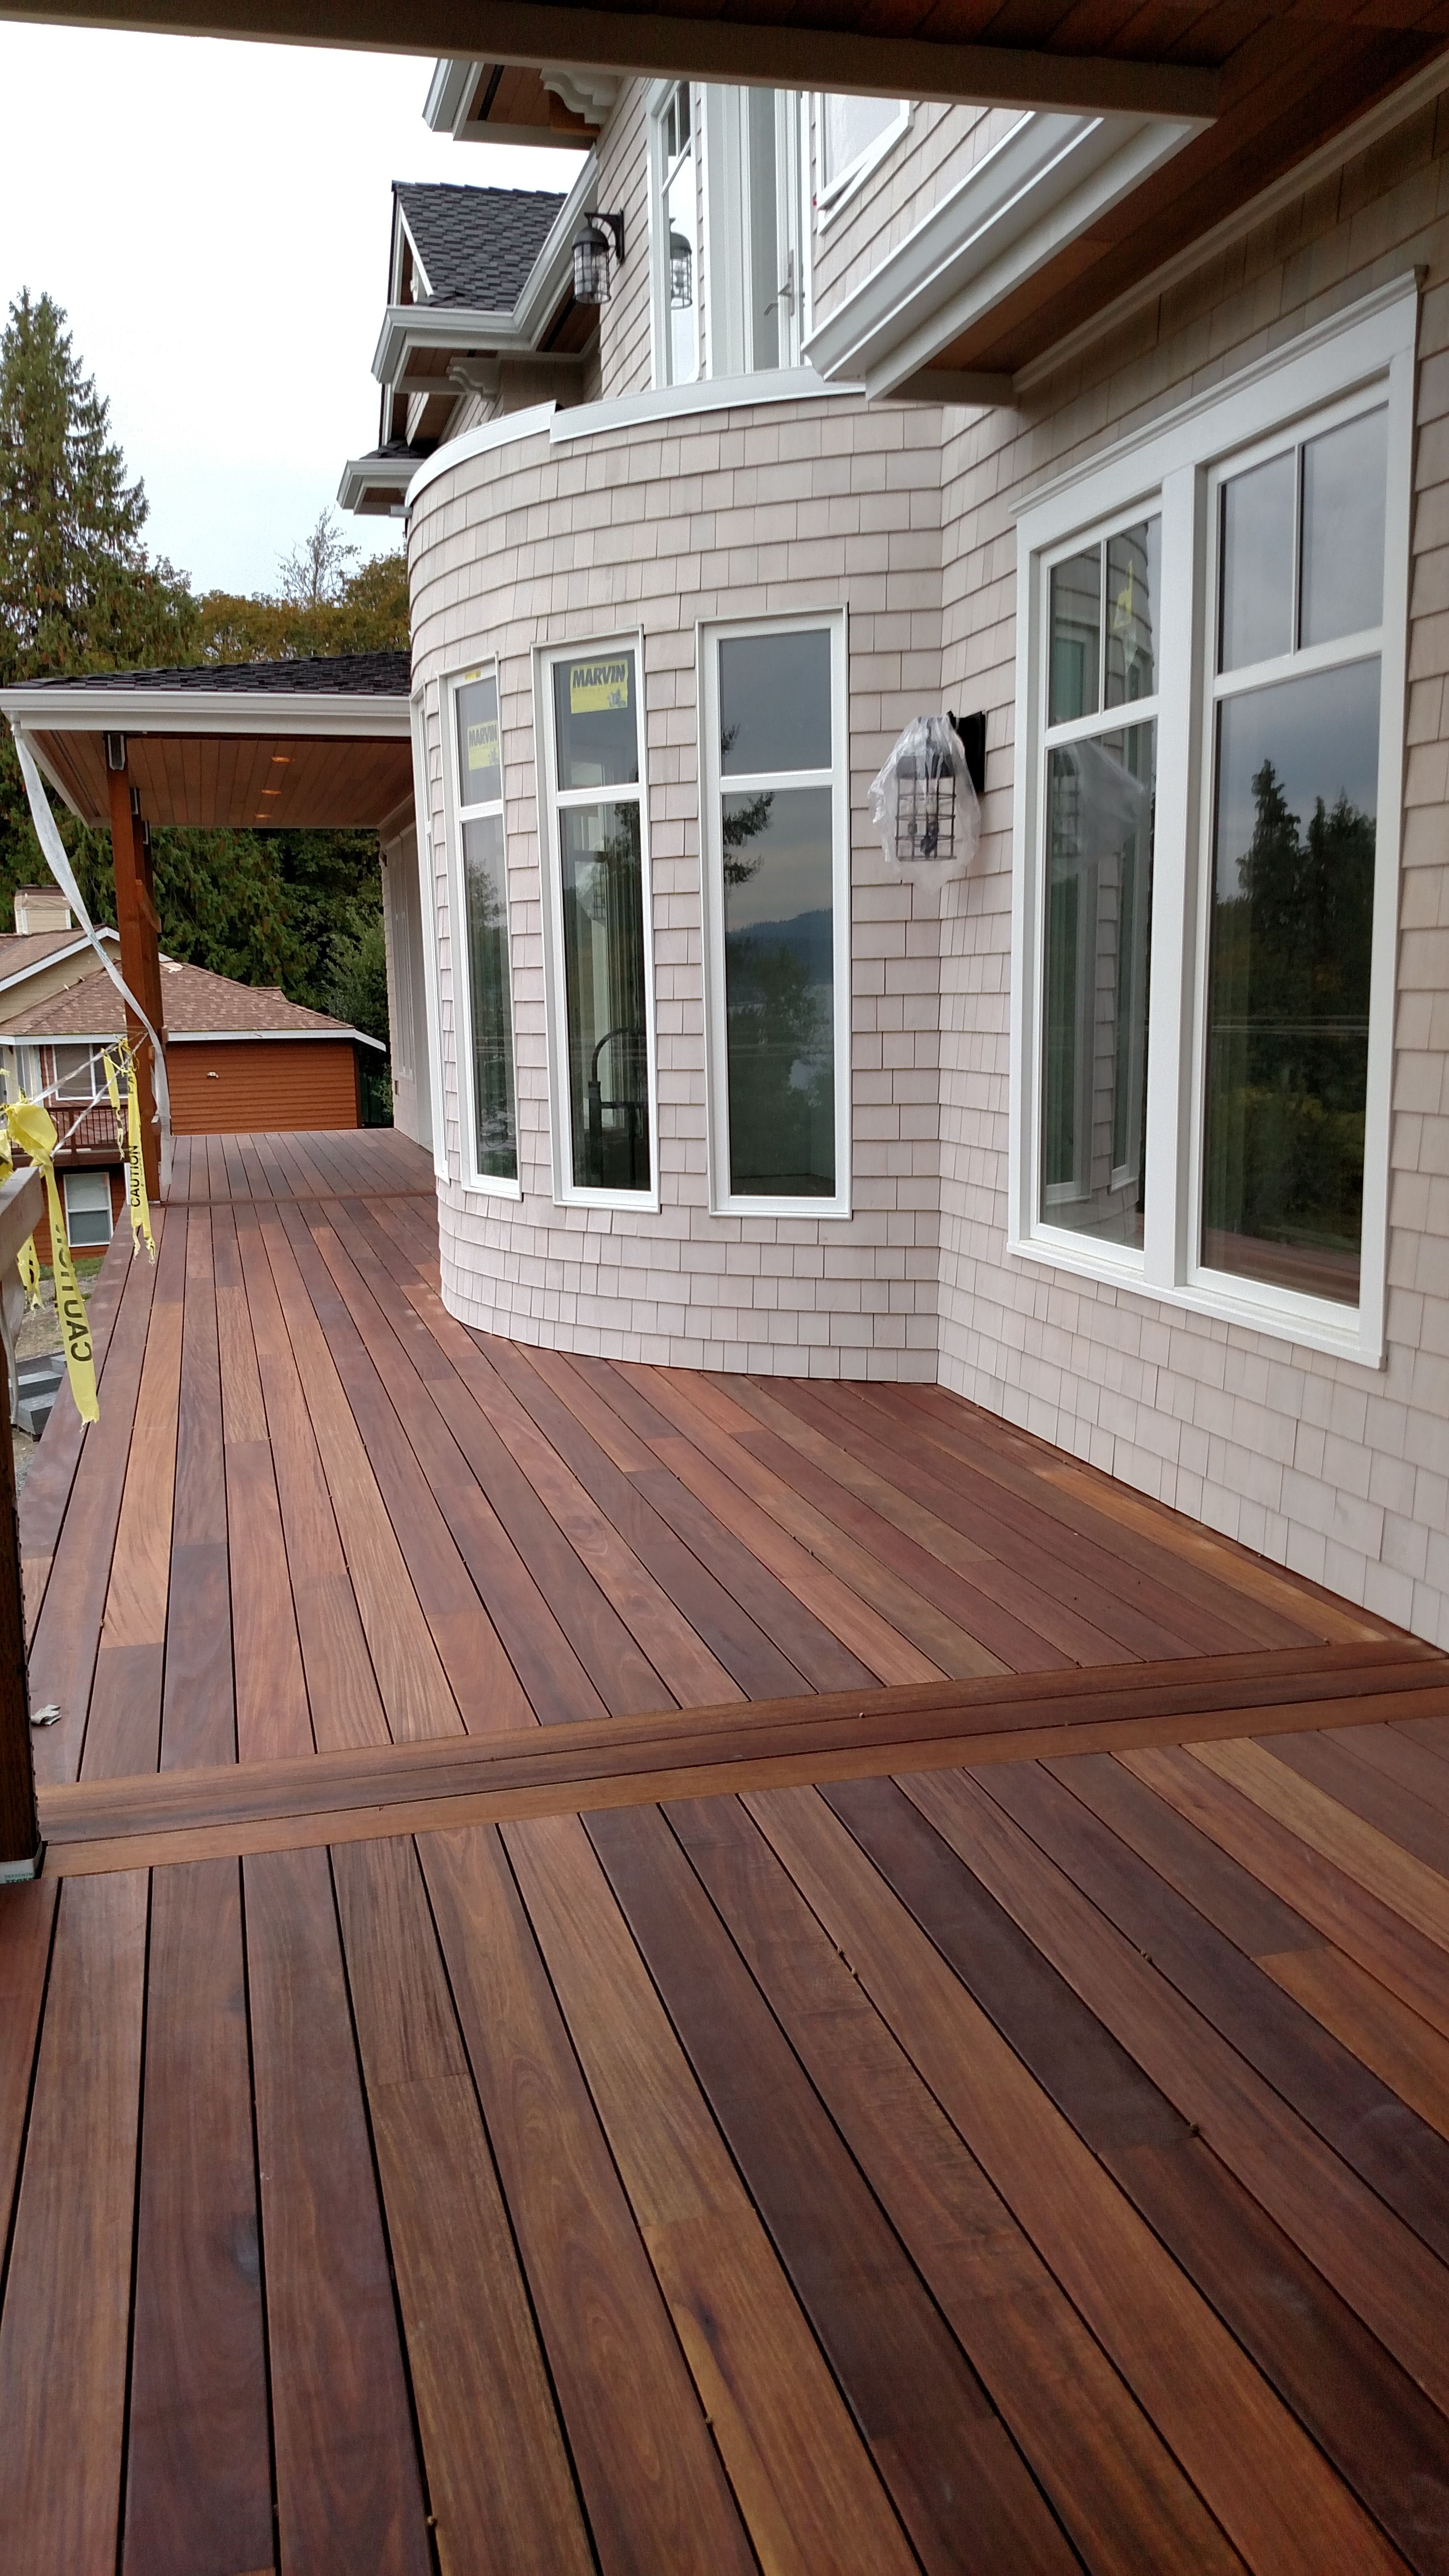 Mahogany Decking Applied With Penofin Exotic Hardwood Exterior Stain pertaining to measurements 2952 X 5248